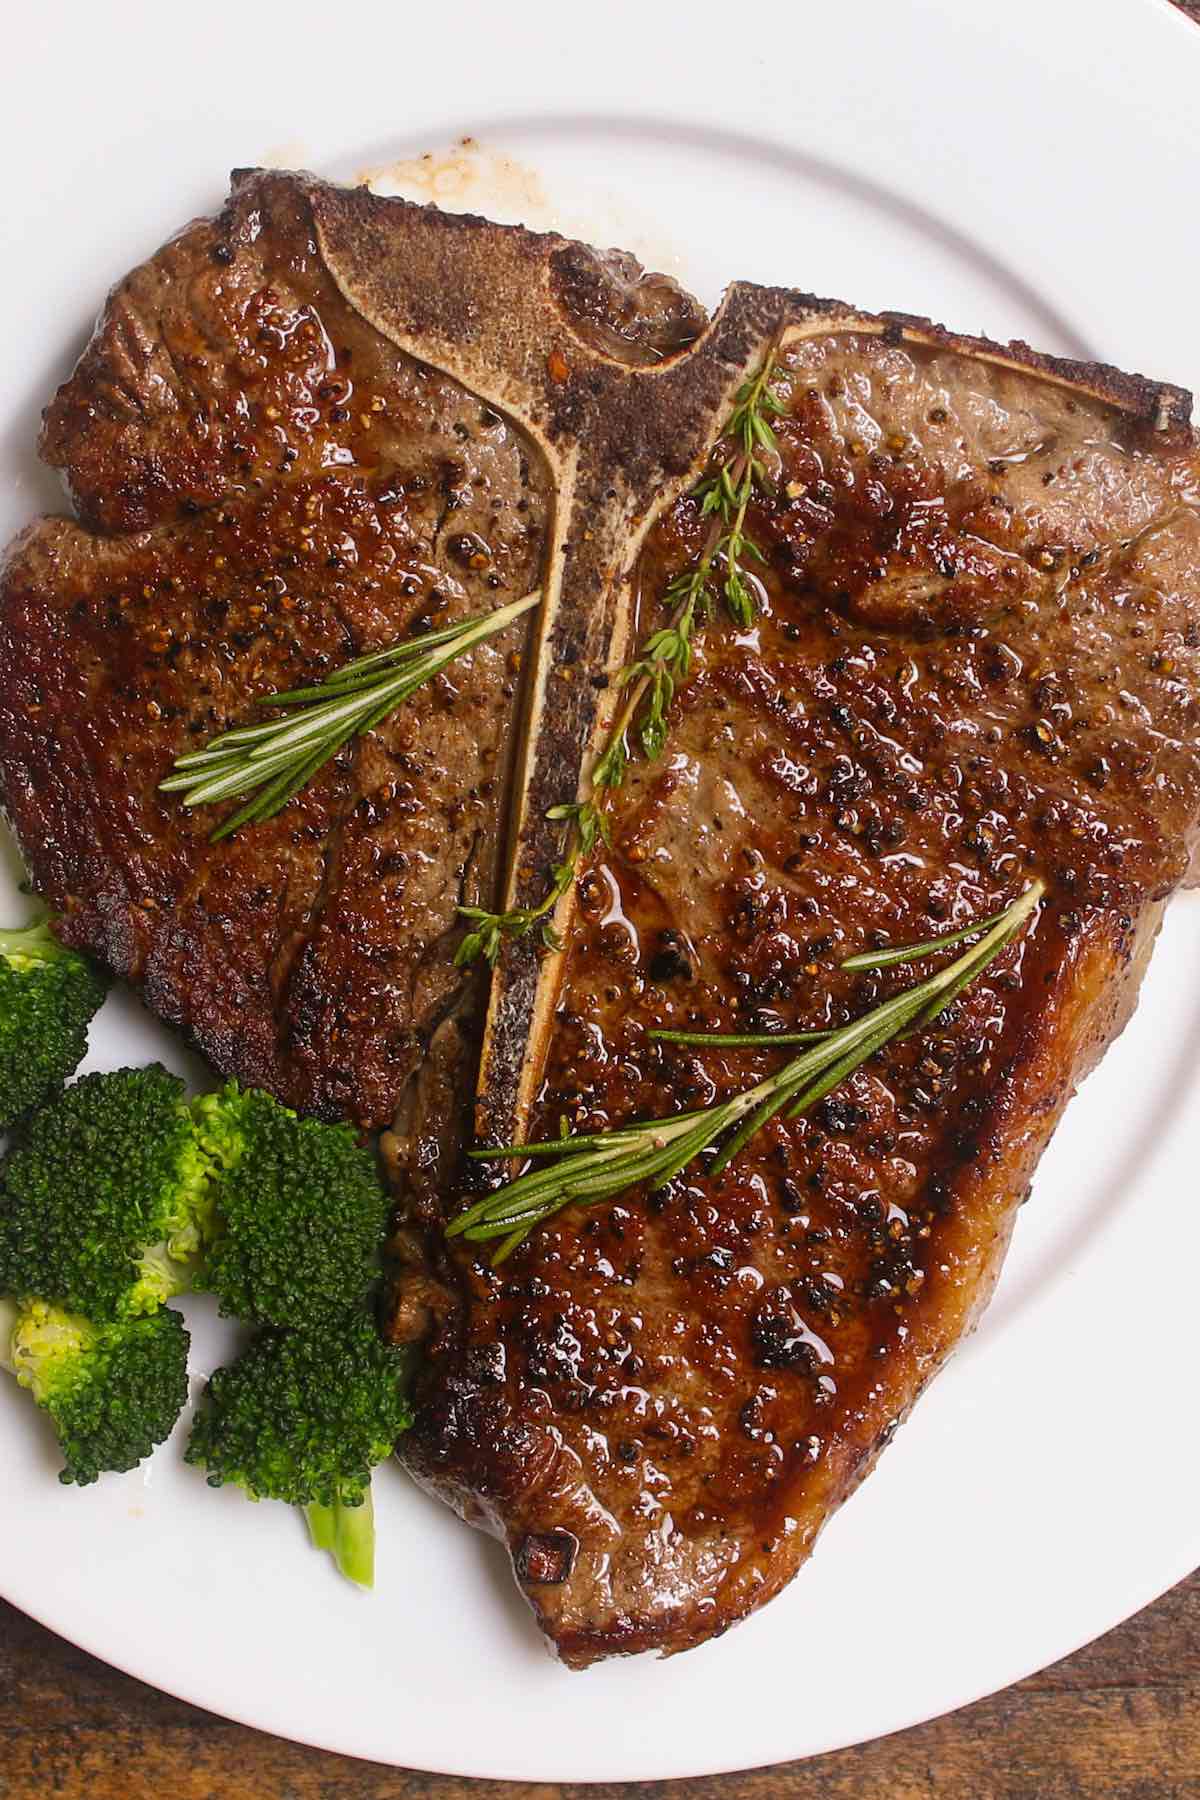 Pan seared porterhouse steak served on a serving plate garnished with sprigs of fresh rosemary and thyme